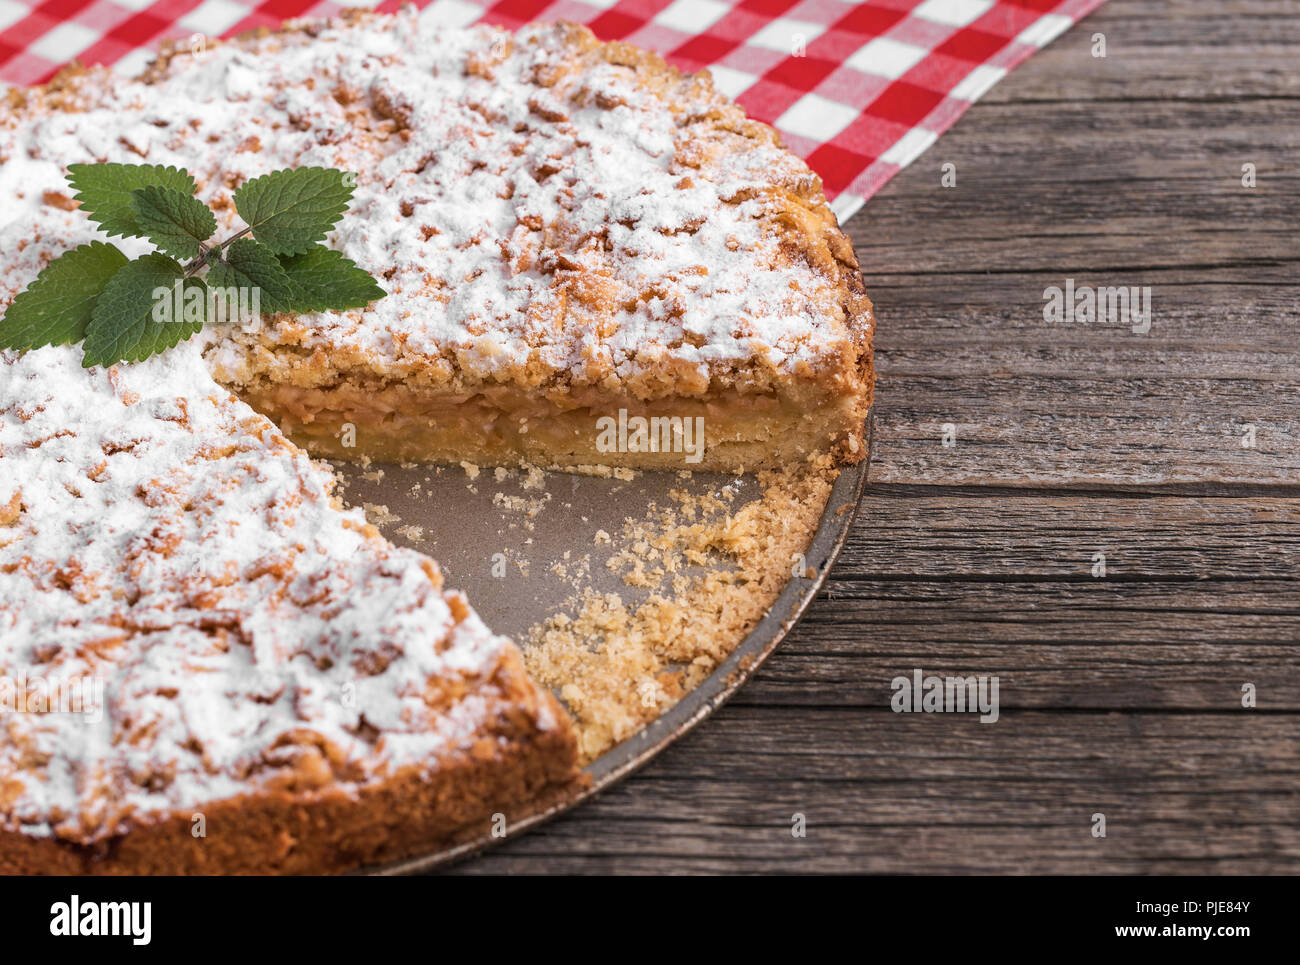 Apple pie on a wooden table. Close-up. Stock Photo